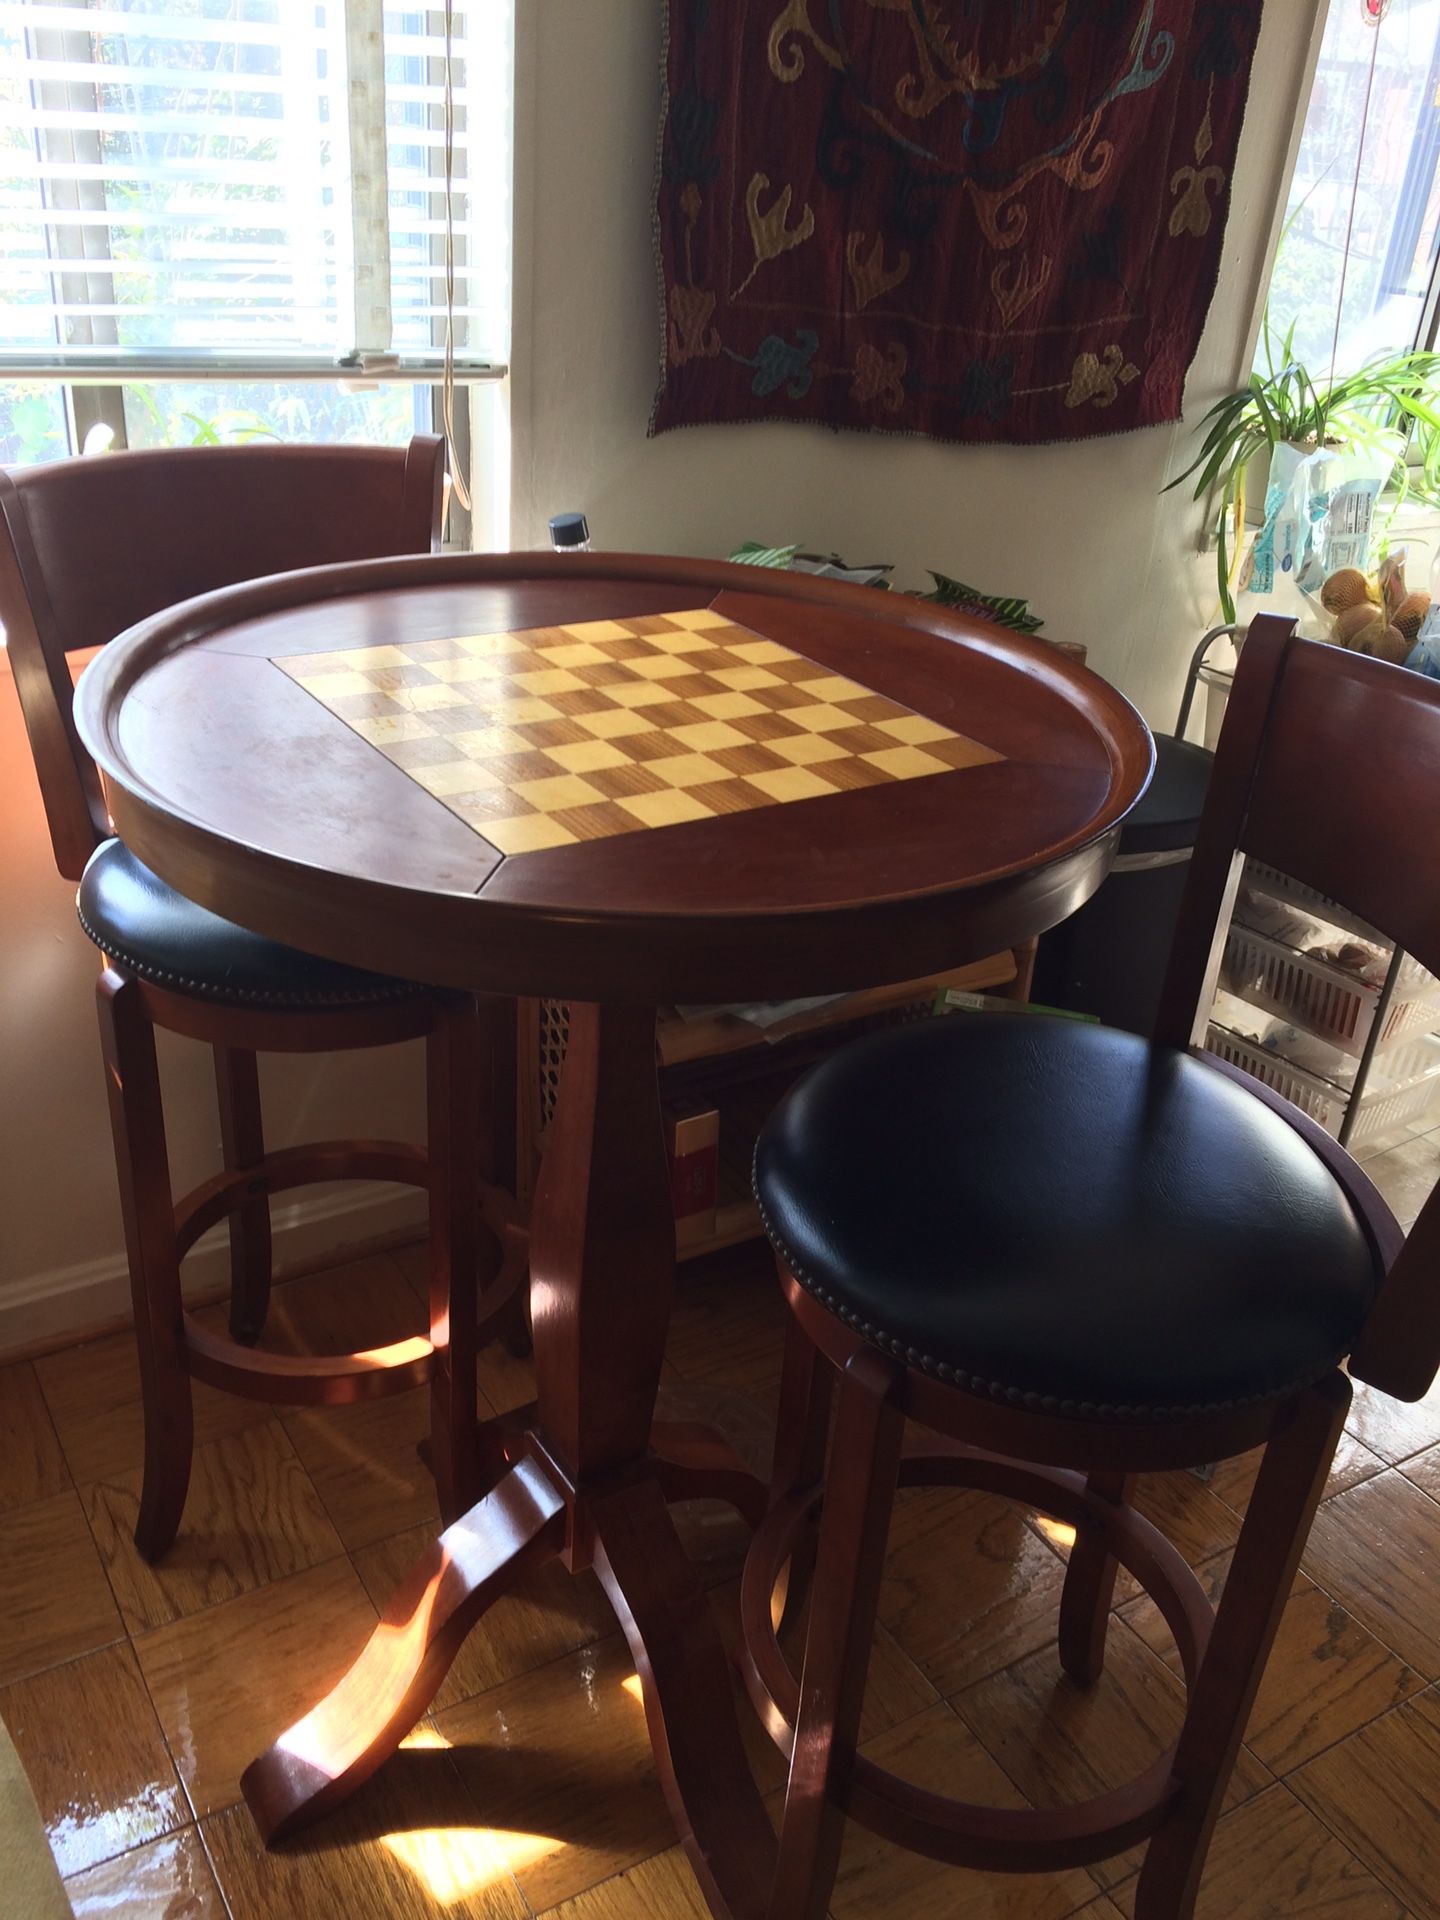 Gaming table + chairs